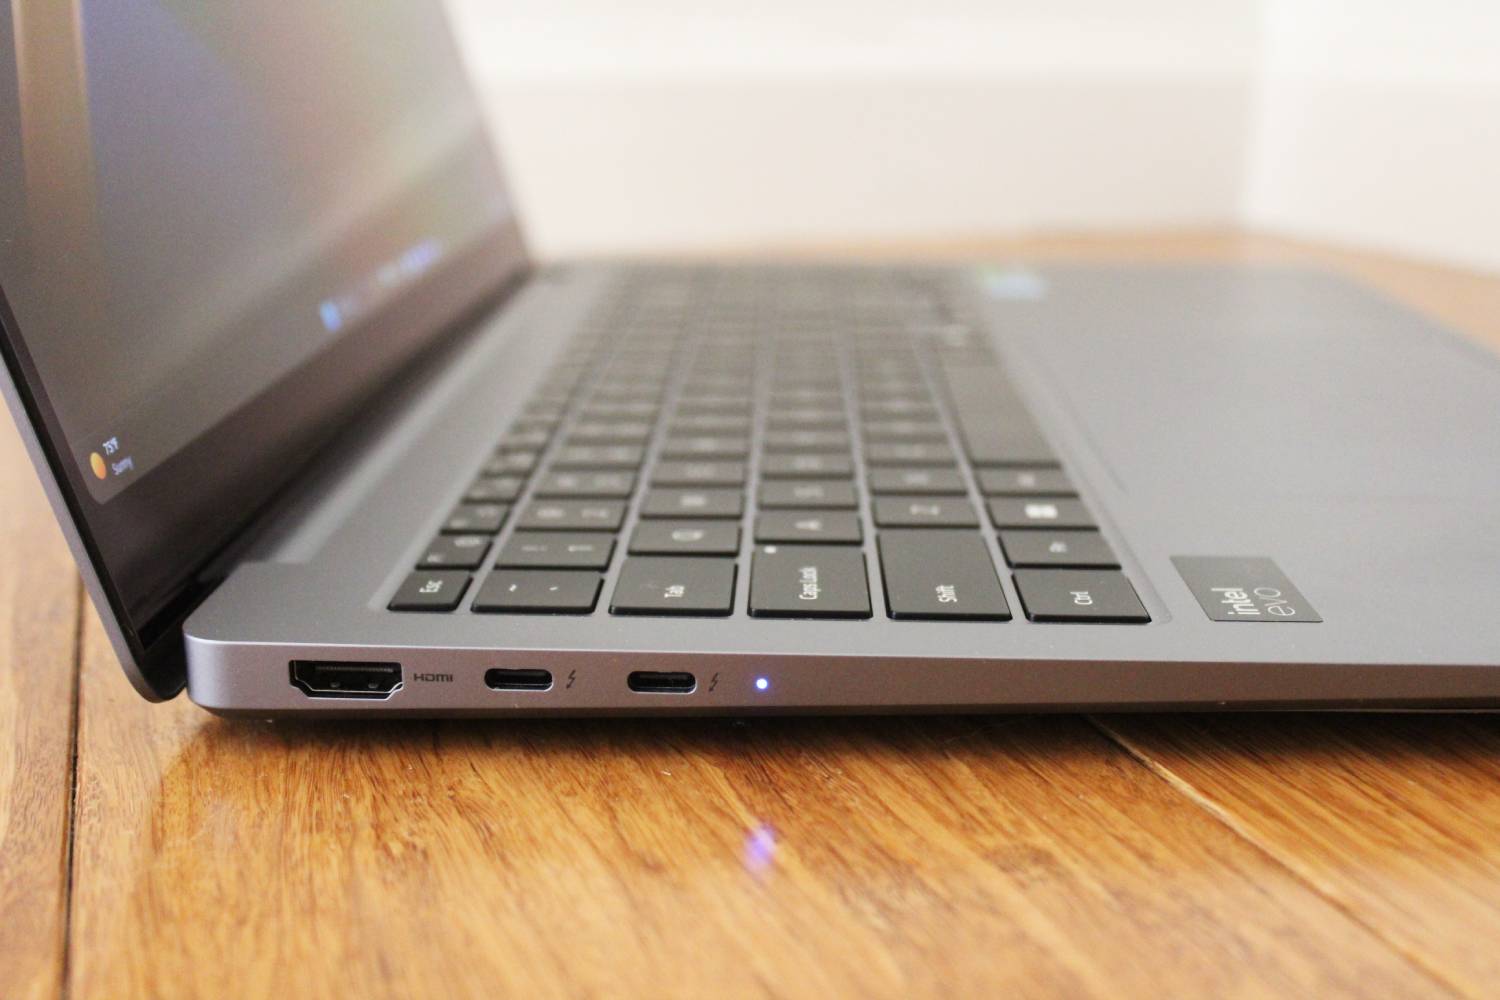 Why Samsung’s answer to the MacBook Pro can’t quite compete